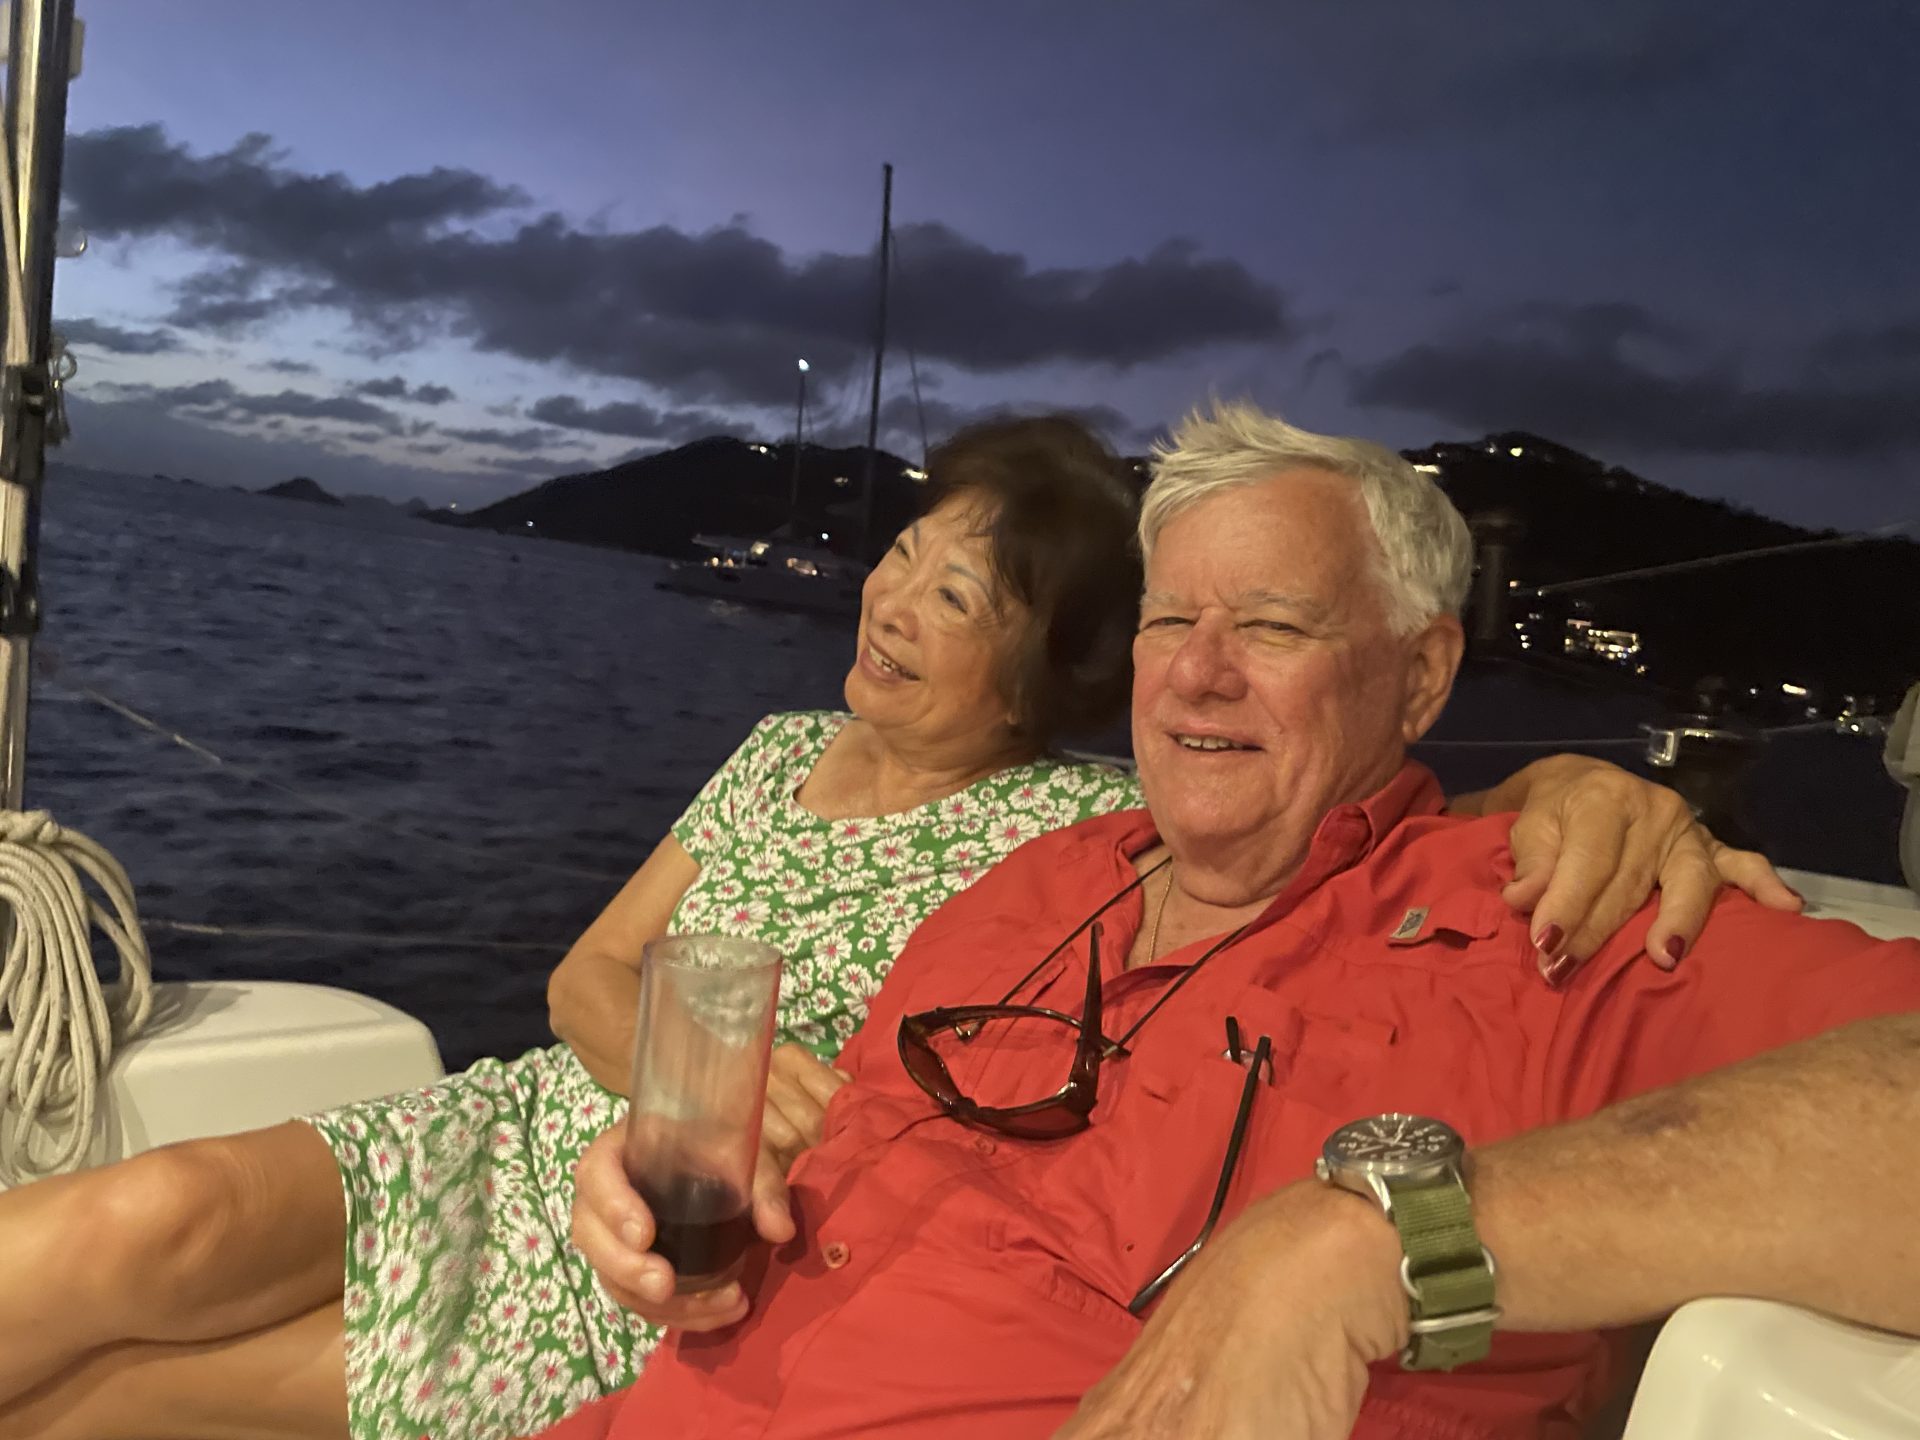 Bill with his love, Gracie, relaxing on the sailboat in the French West Indies.  It was a fun trip with friends.<br />
We’re going to miss that easy smile.